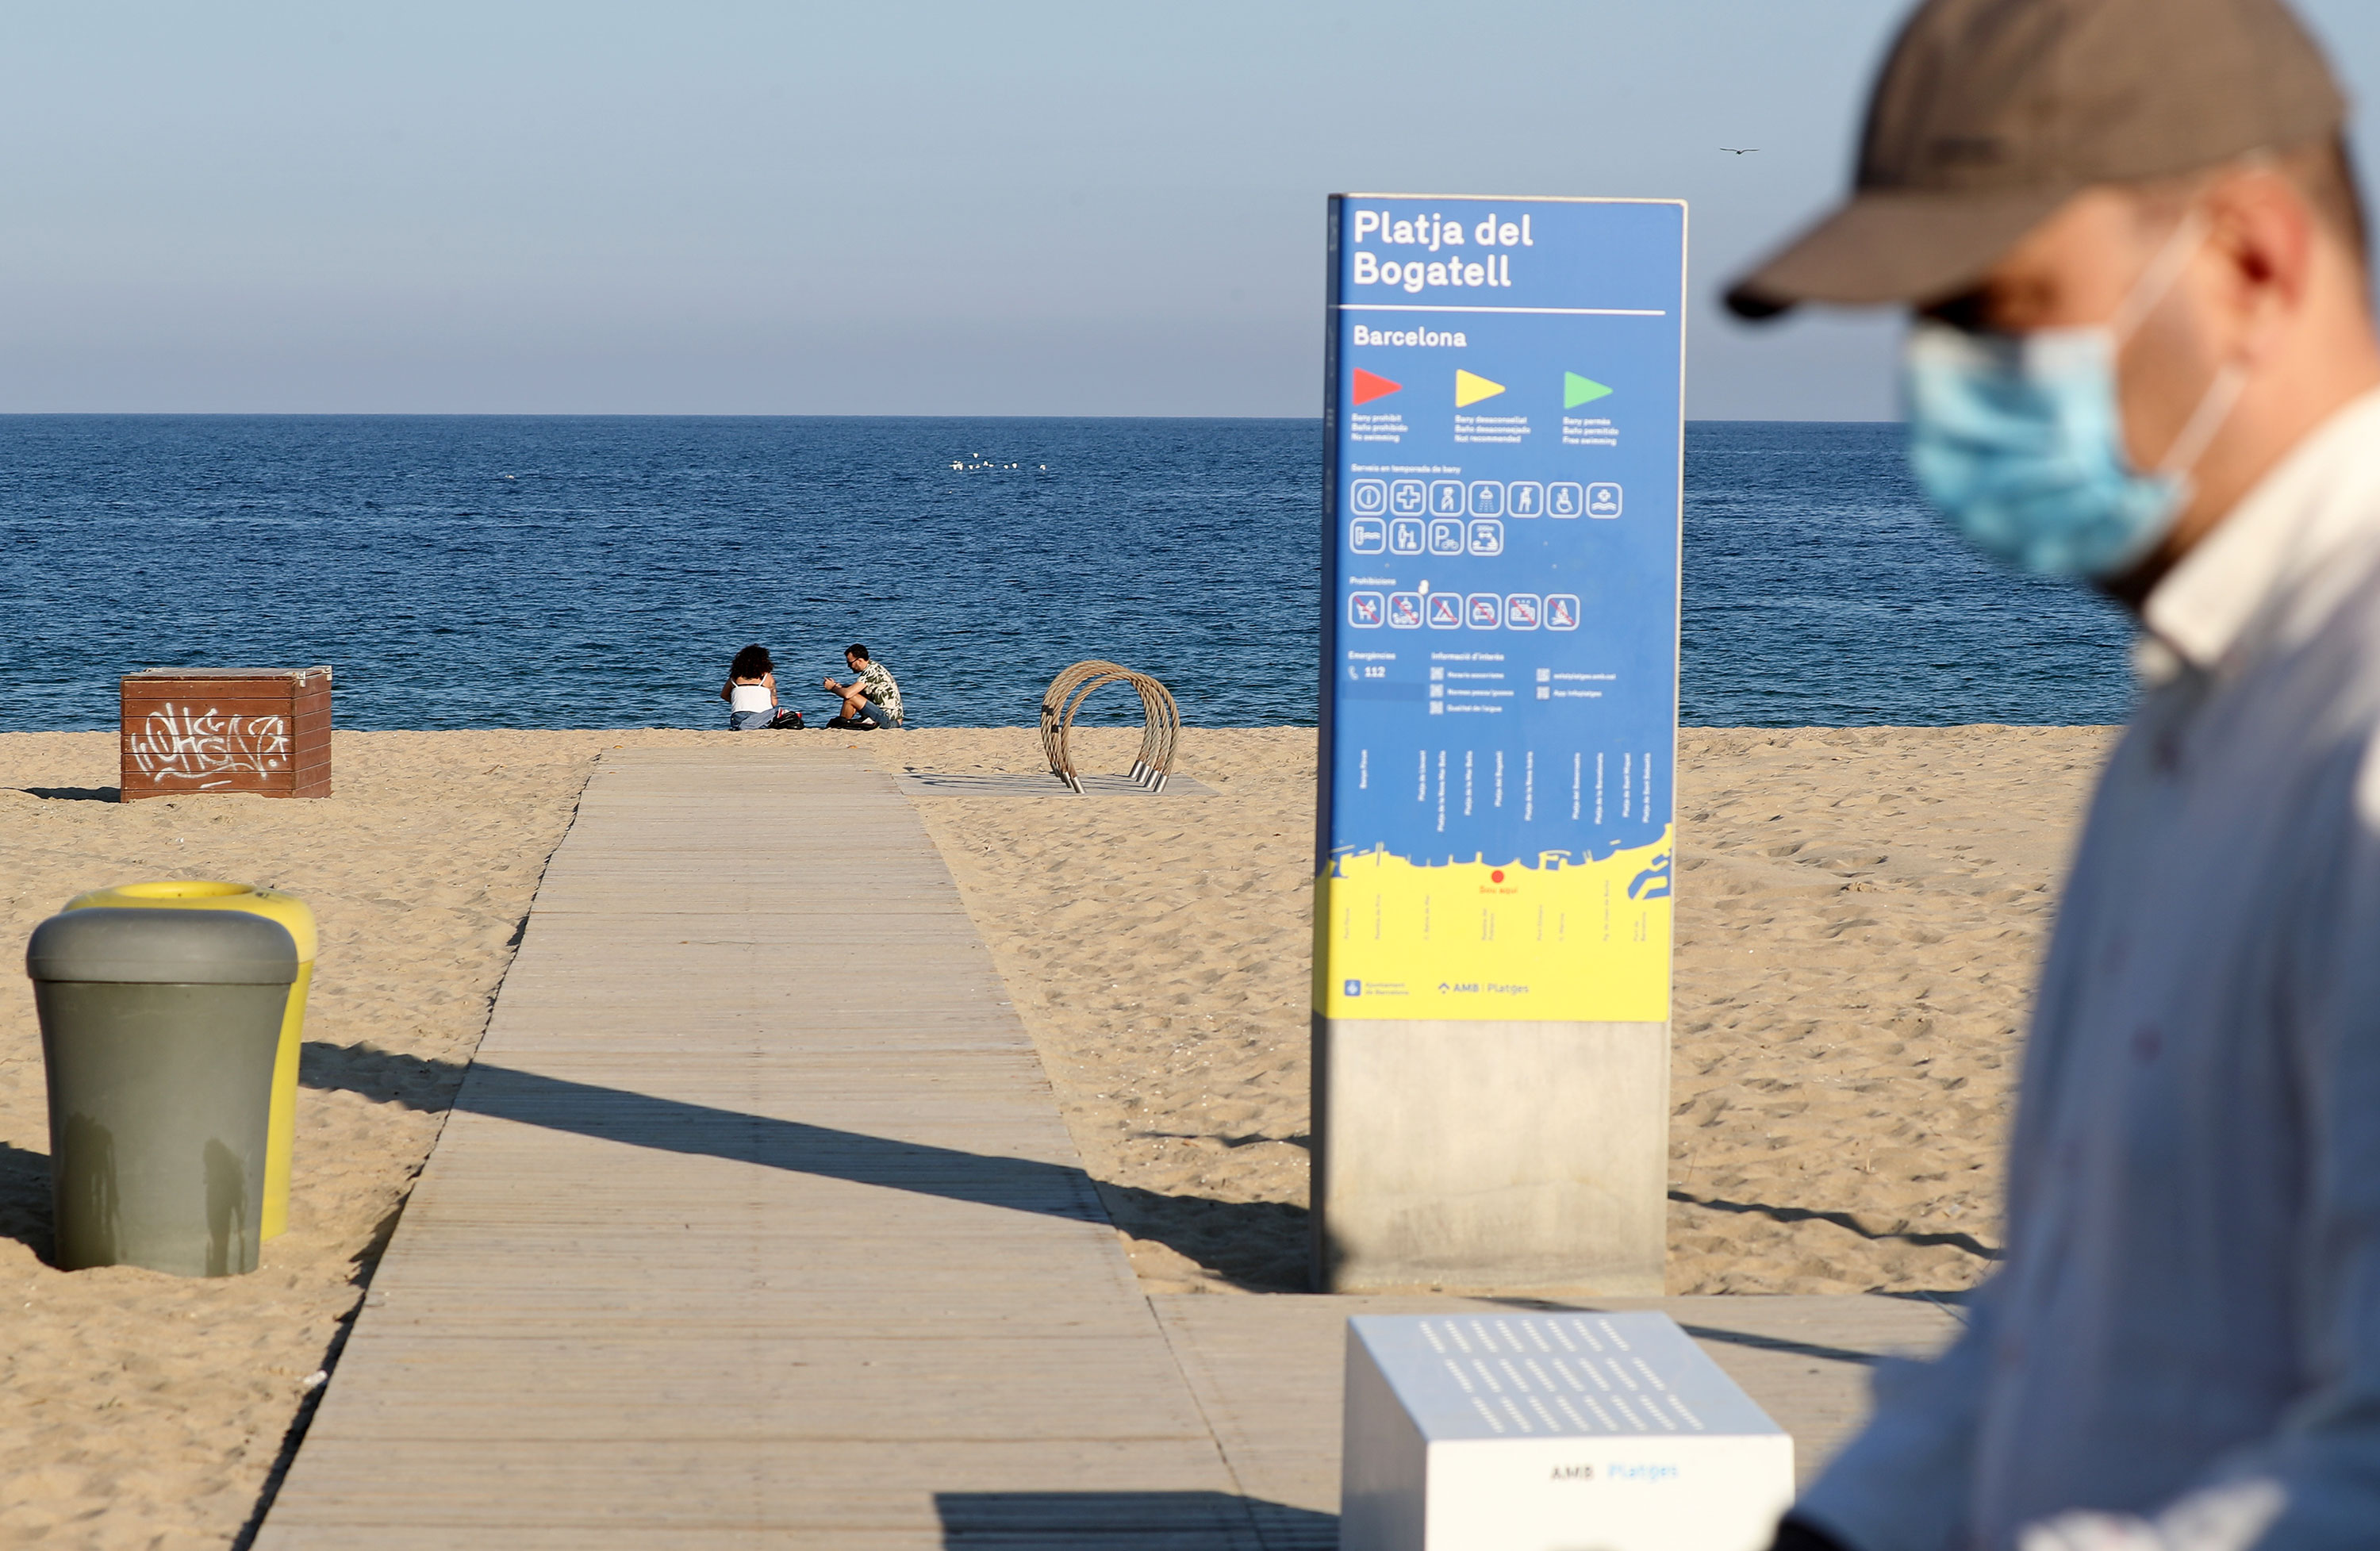 People relax on a beach in Barcelona on May 20.